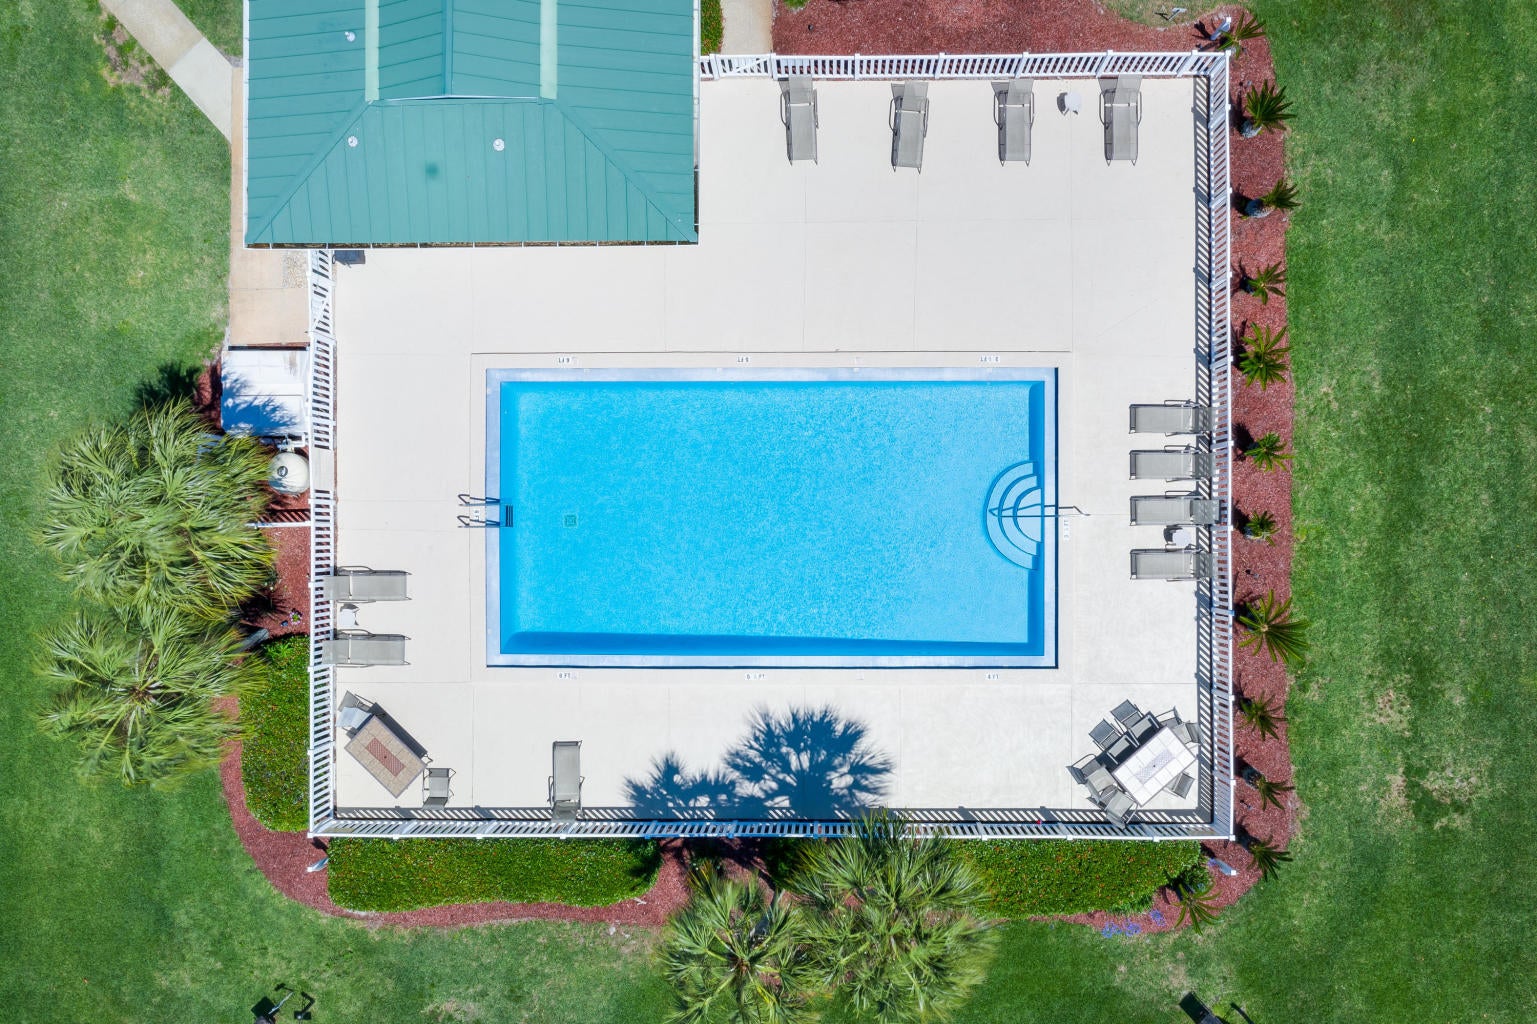 Ariel view of the pool